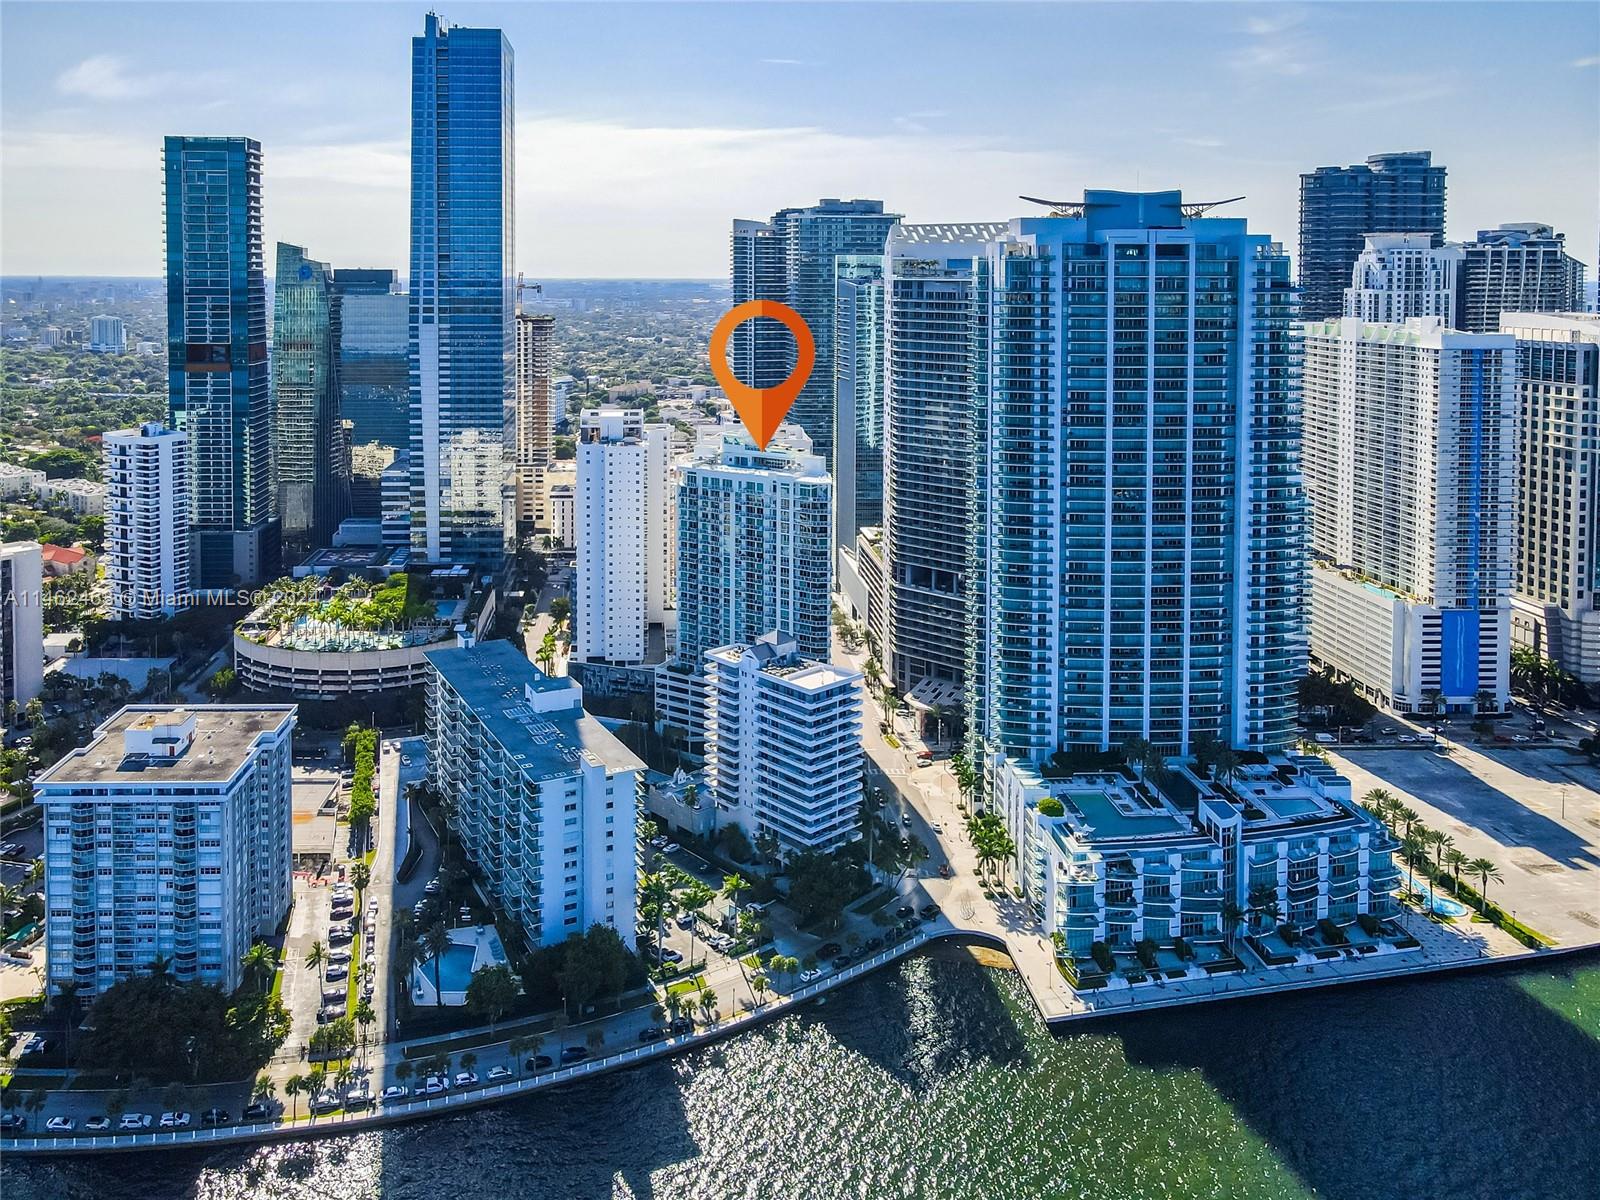 Price adjustment! Seller motivated. Stylish condo in the heart of Brickell, Miami's premier neighborhood for urban living. Just steps away from the city's finest dining, shopping, and entertainment. Washer & Dryer in unit. Amenities include state-of-the-art fitness center, infinity-edge pool and club room.
Live the high-rise lifestyle you've always dreamed of. This condo offers the perfect blend of luxury, convenience, and sophistication. Don't miss out on this opportunity to experience Brickell living at its finest. Live the dream – schedule a viewing today!